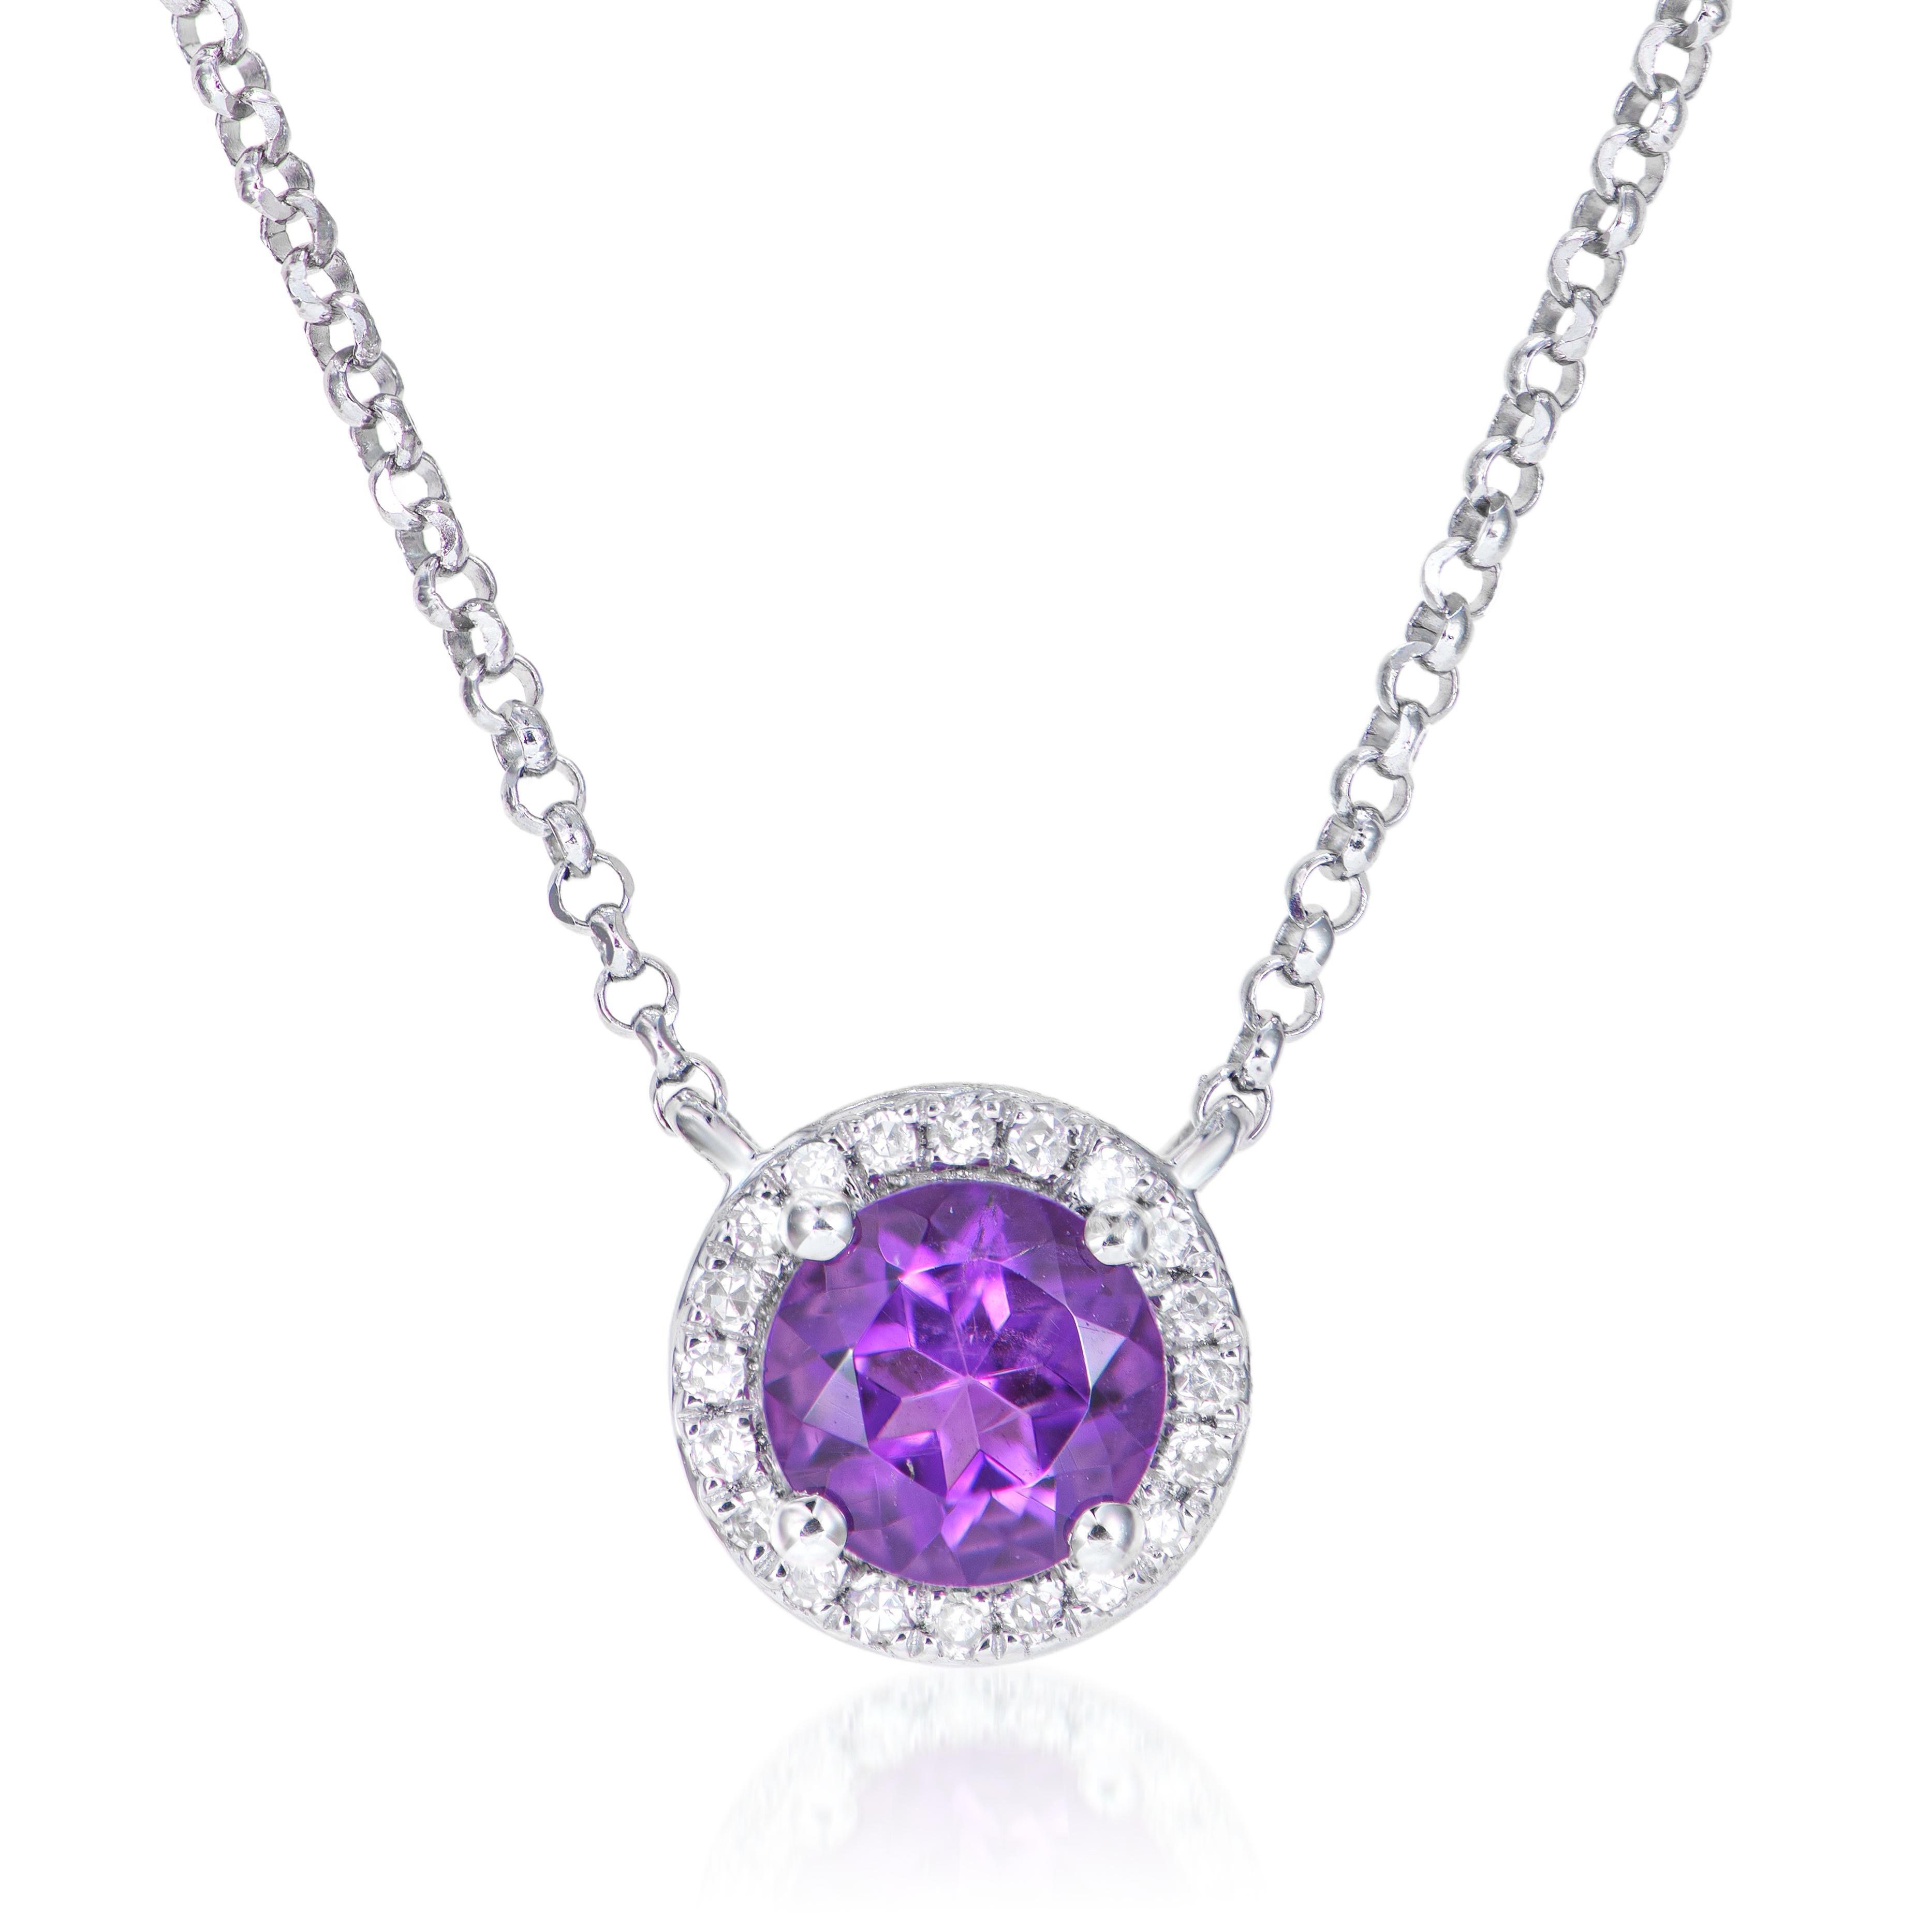 Presented A lovely set of Amethyst for people who value quality and want to wear it to any occasion or celebration. The white gold Amethyst Pendant adorned with diamonds offer a classic yet elegant appearance.

Amethyst Pendant in 18Karat White Gold